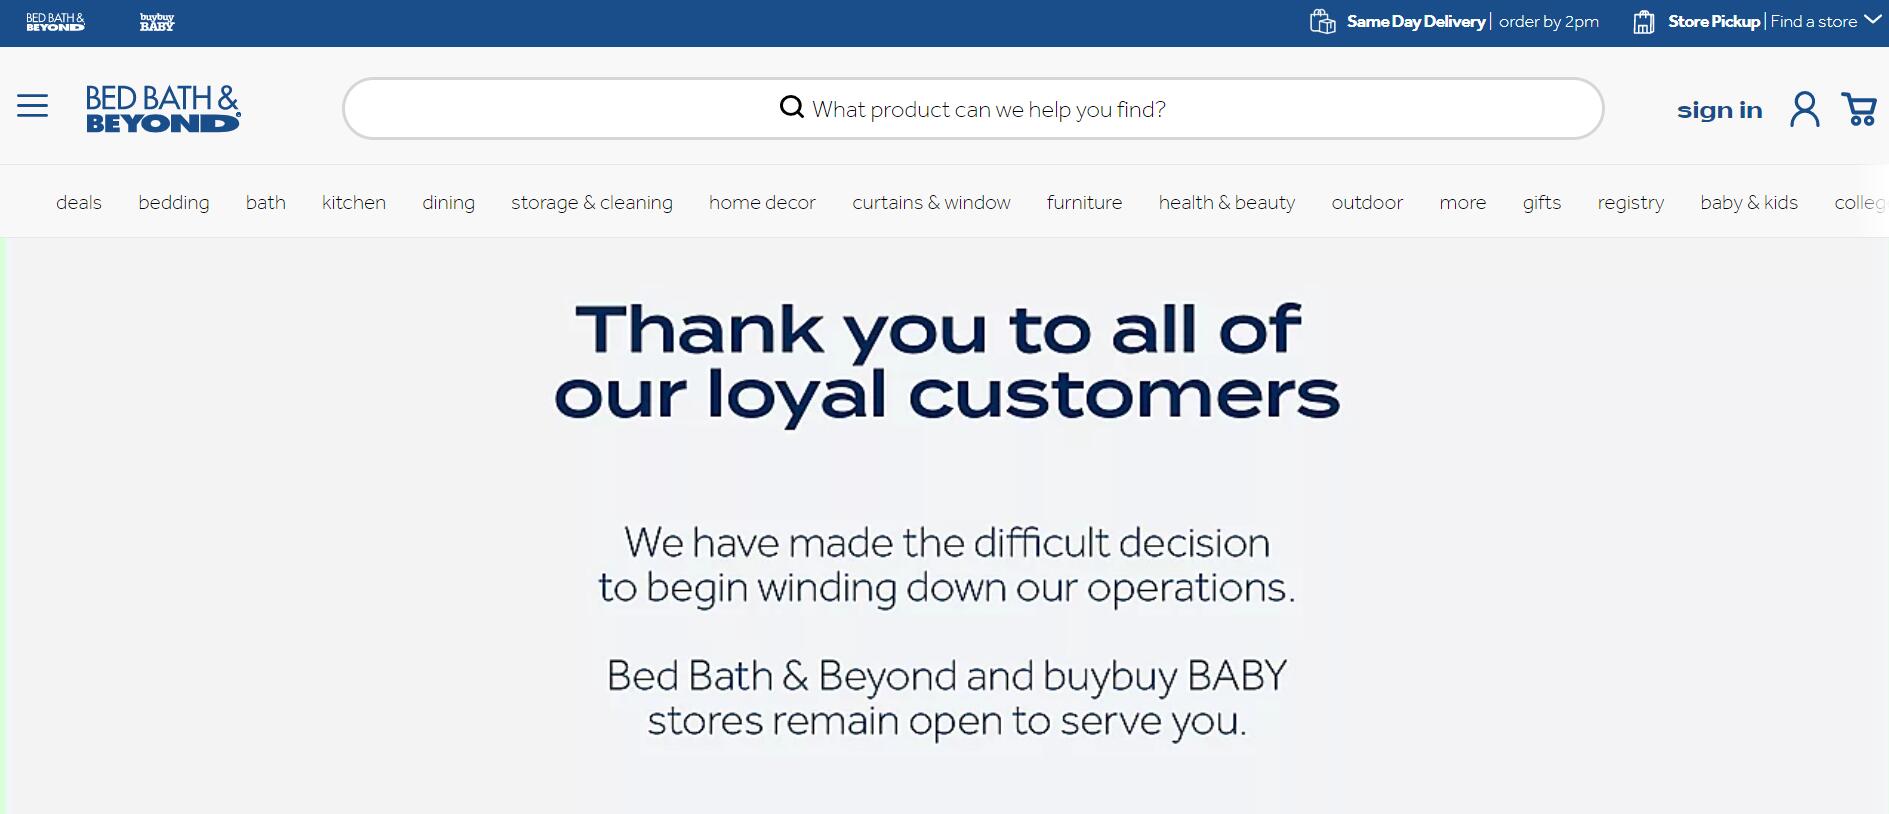 Bed Bath & Beyond Files for Bankruptcy Protection and Asset Sale After Multiple Self-Rescue Efforts Fail